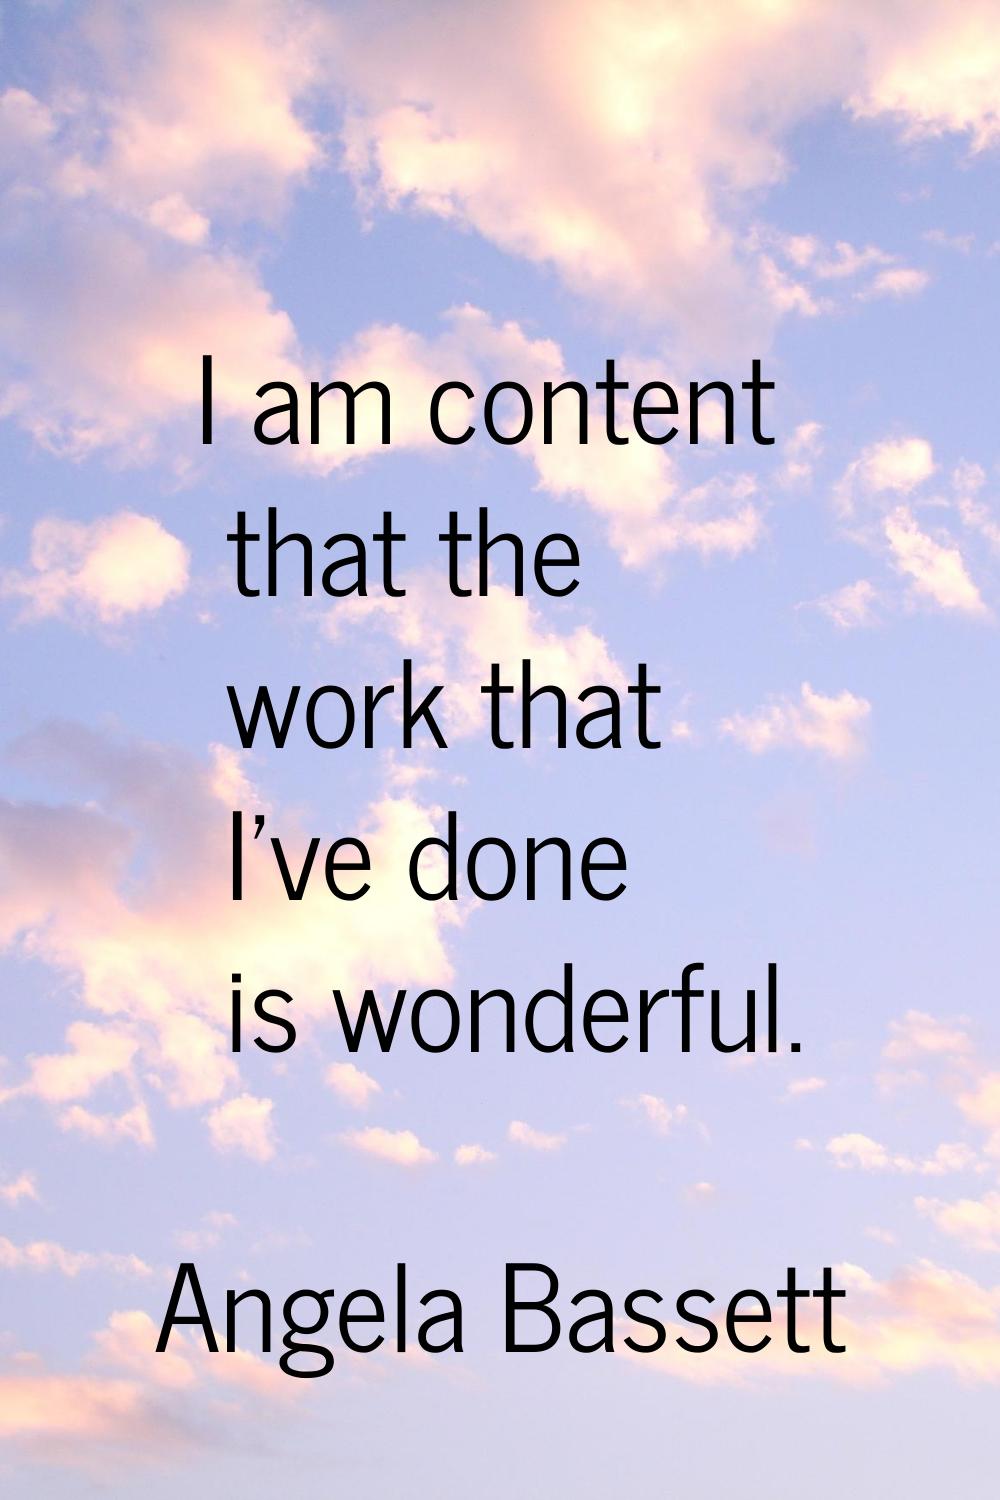 I am content that the work that I've done is wonderful.